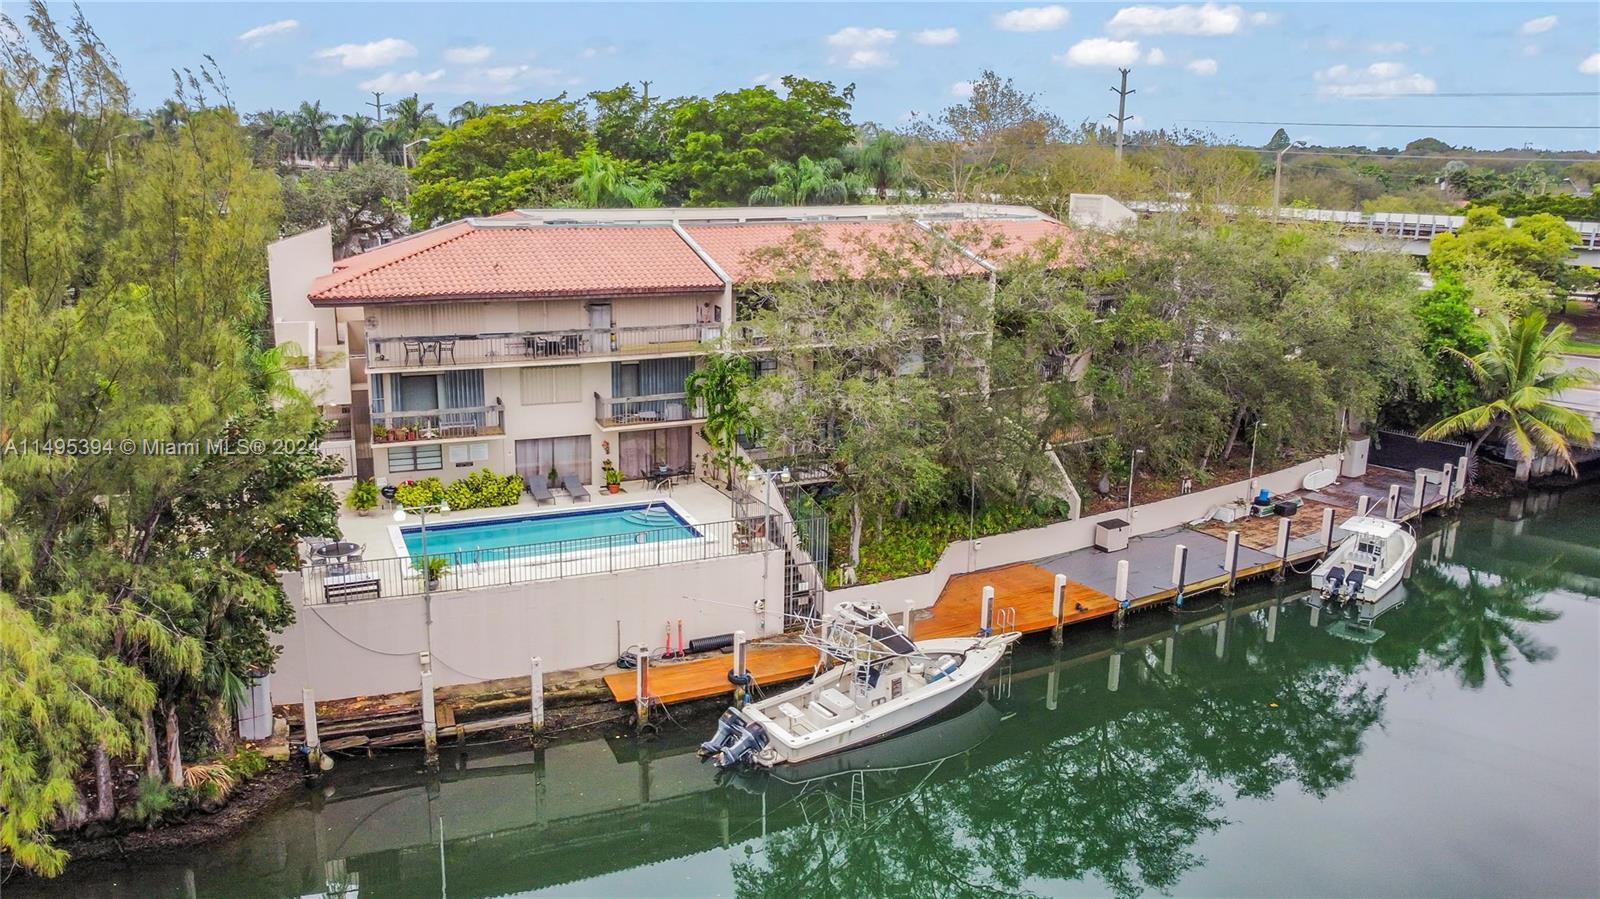 Deeded dock for boaters & 2 bedroom 2 bath condo on prestigious Coral Gables property. Unit features